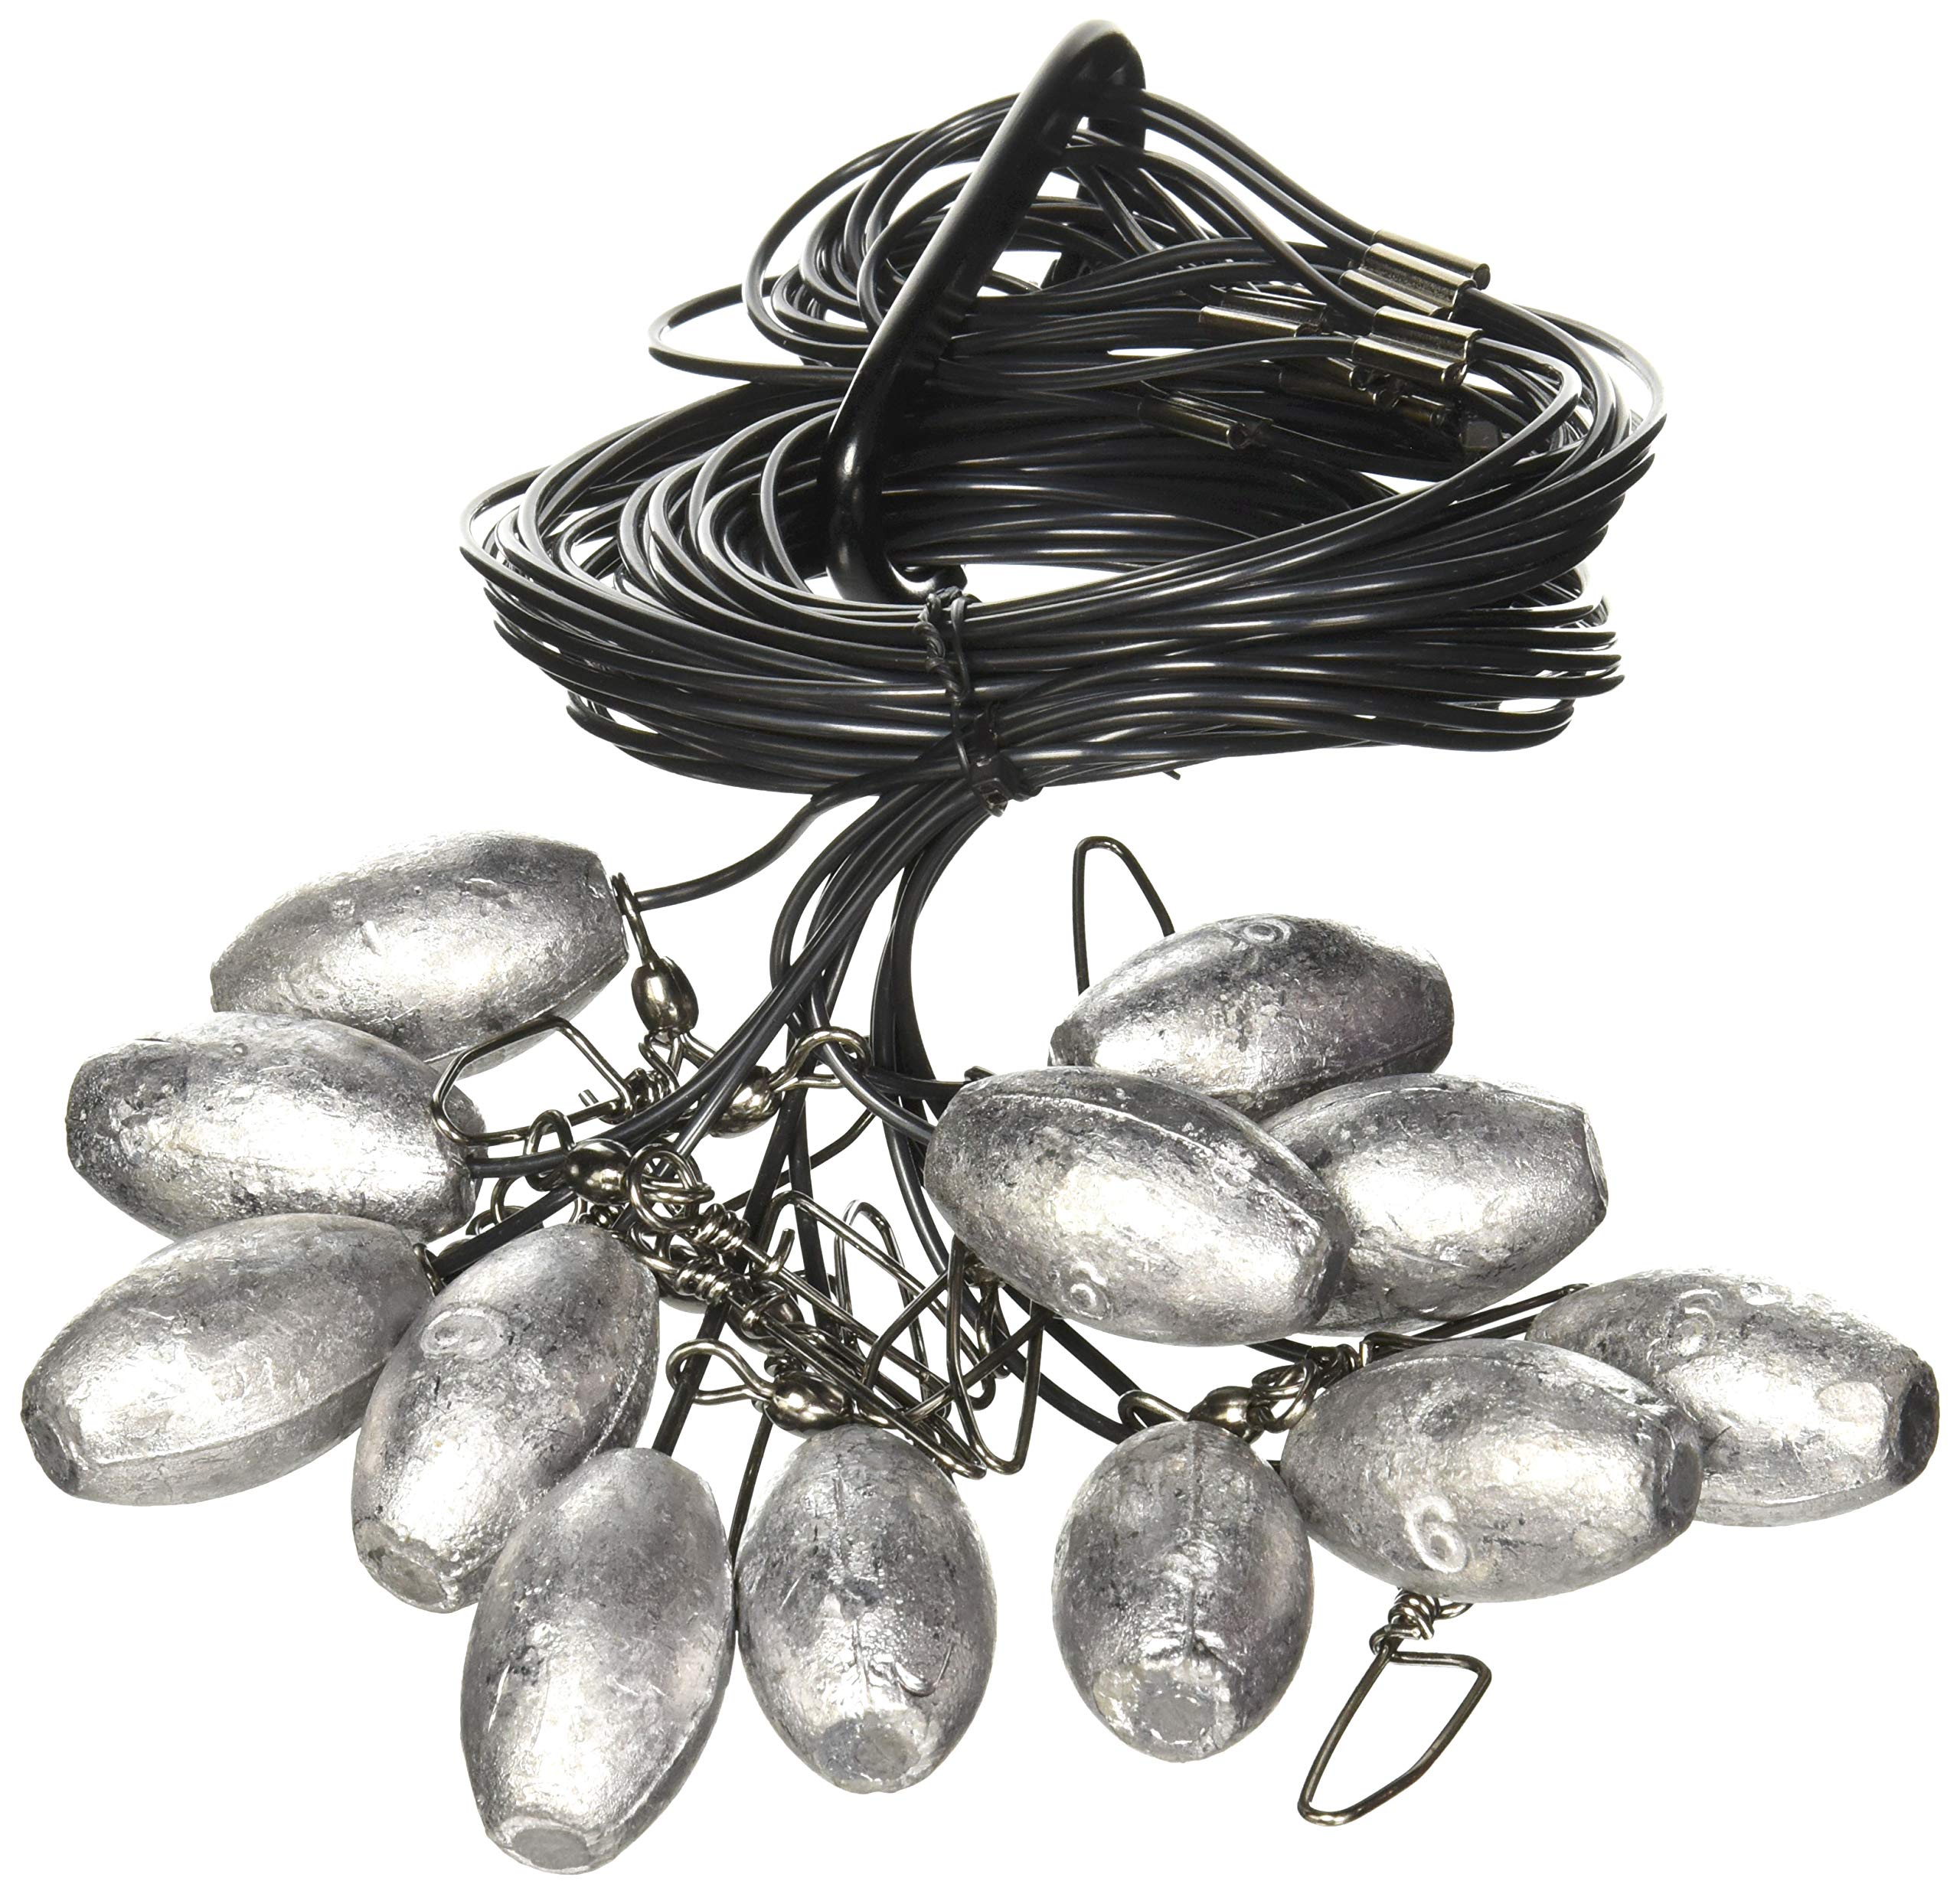 Mojo Texas Style Tangle Free Decoy Rigging System 48 In 6 Oz HW2105  816740002378